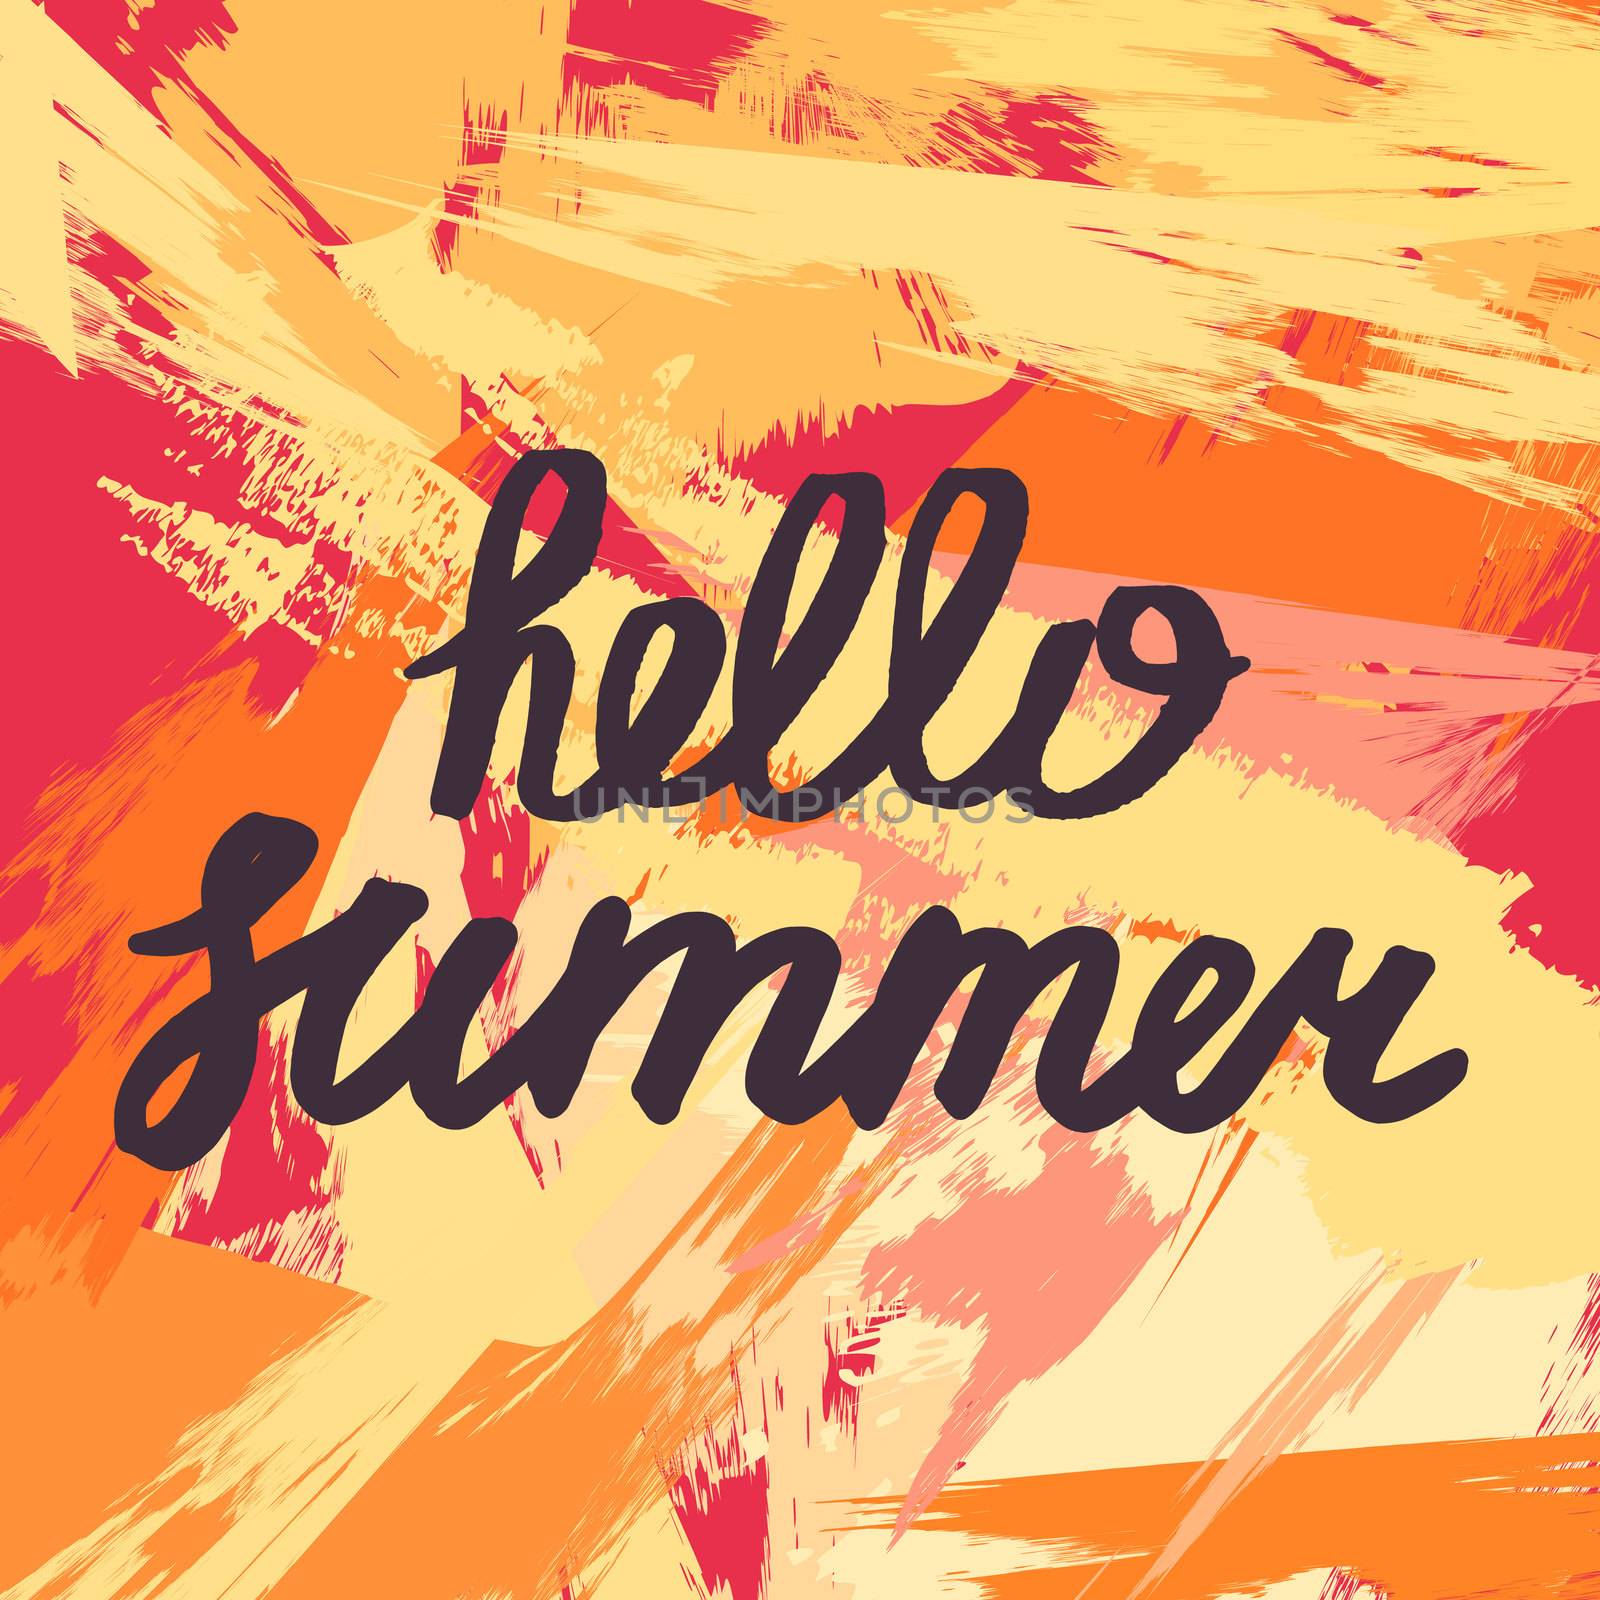 Hello Summer Lettering by brush. Typographic vacation and travel retro poster with grunge bright background. Vector